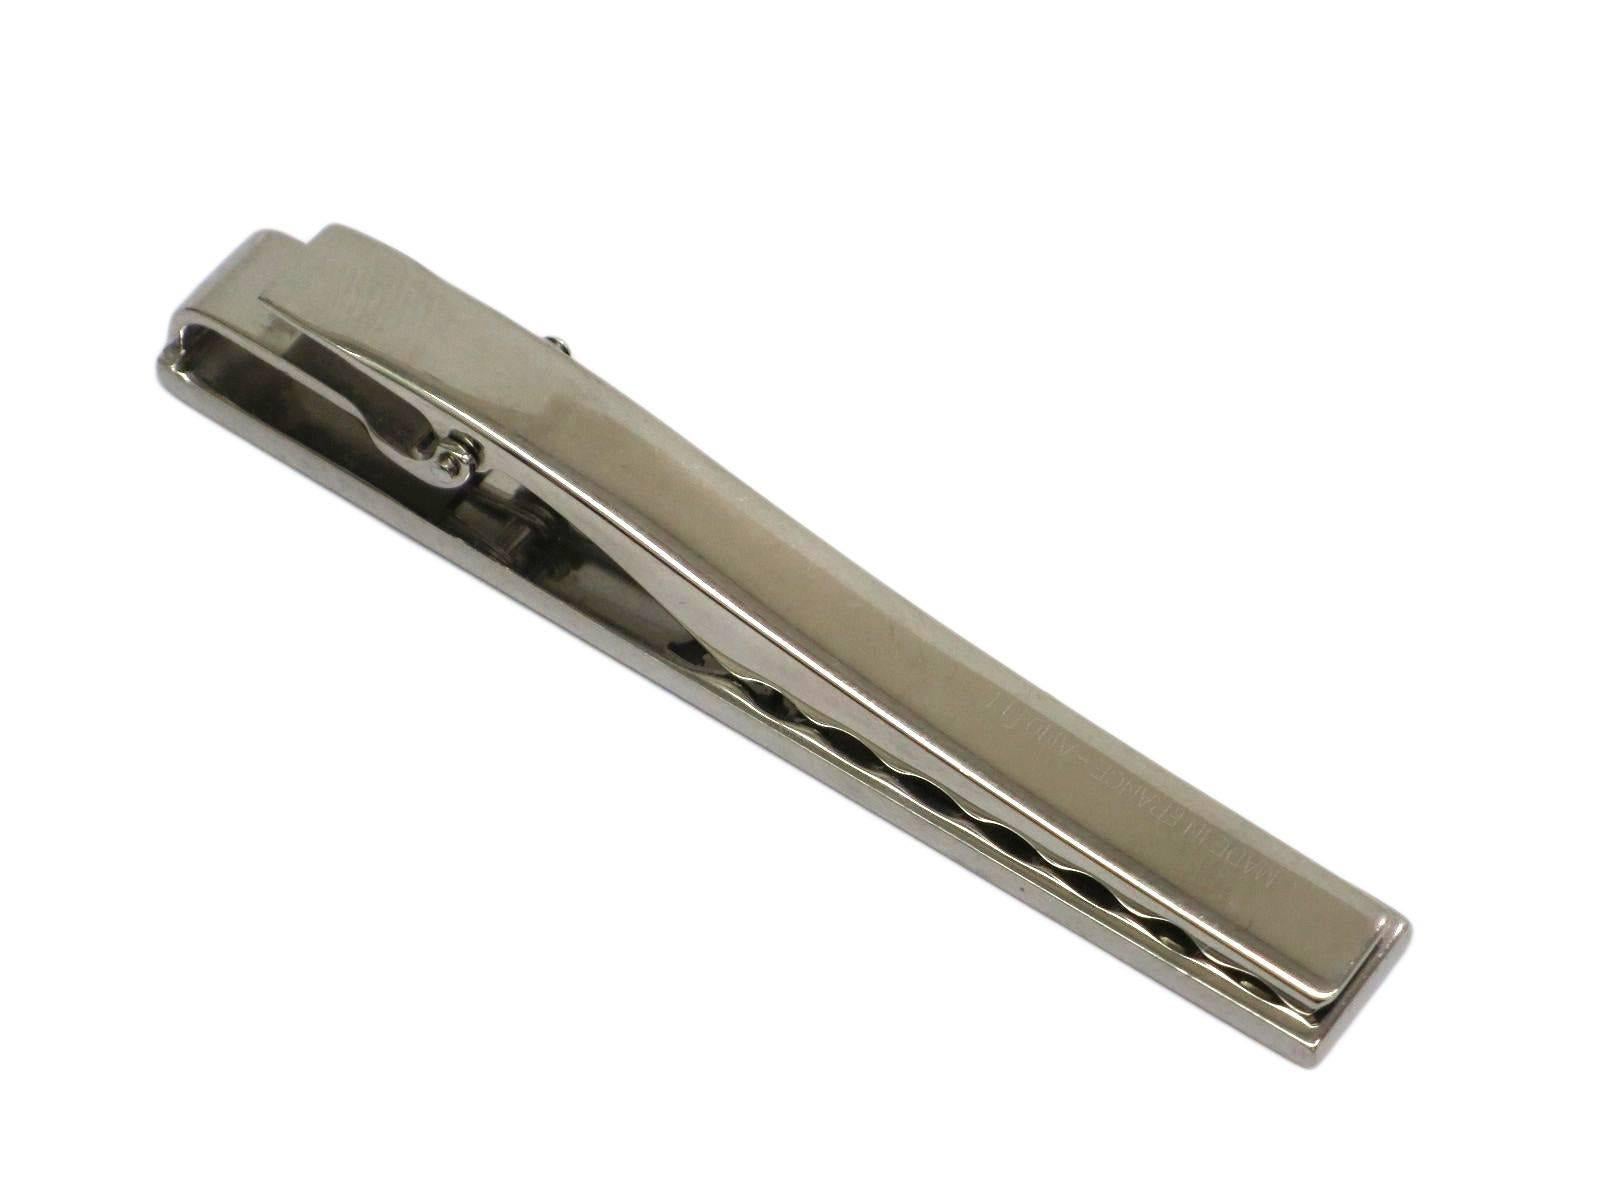 CURATOR'S NOTES

Polish off your look with this sophisticated Louis Vuitton silver tone tie clip.  Expecting a quick sale at this price.

Silver tone
Made in France
Date code AN0111
Measures 2.4